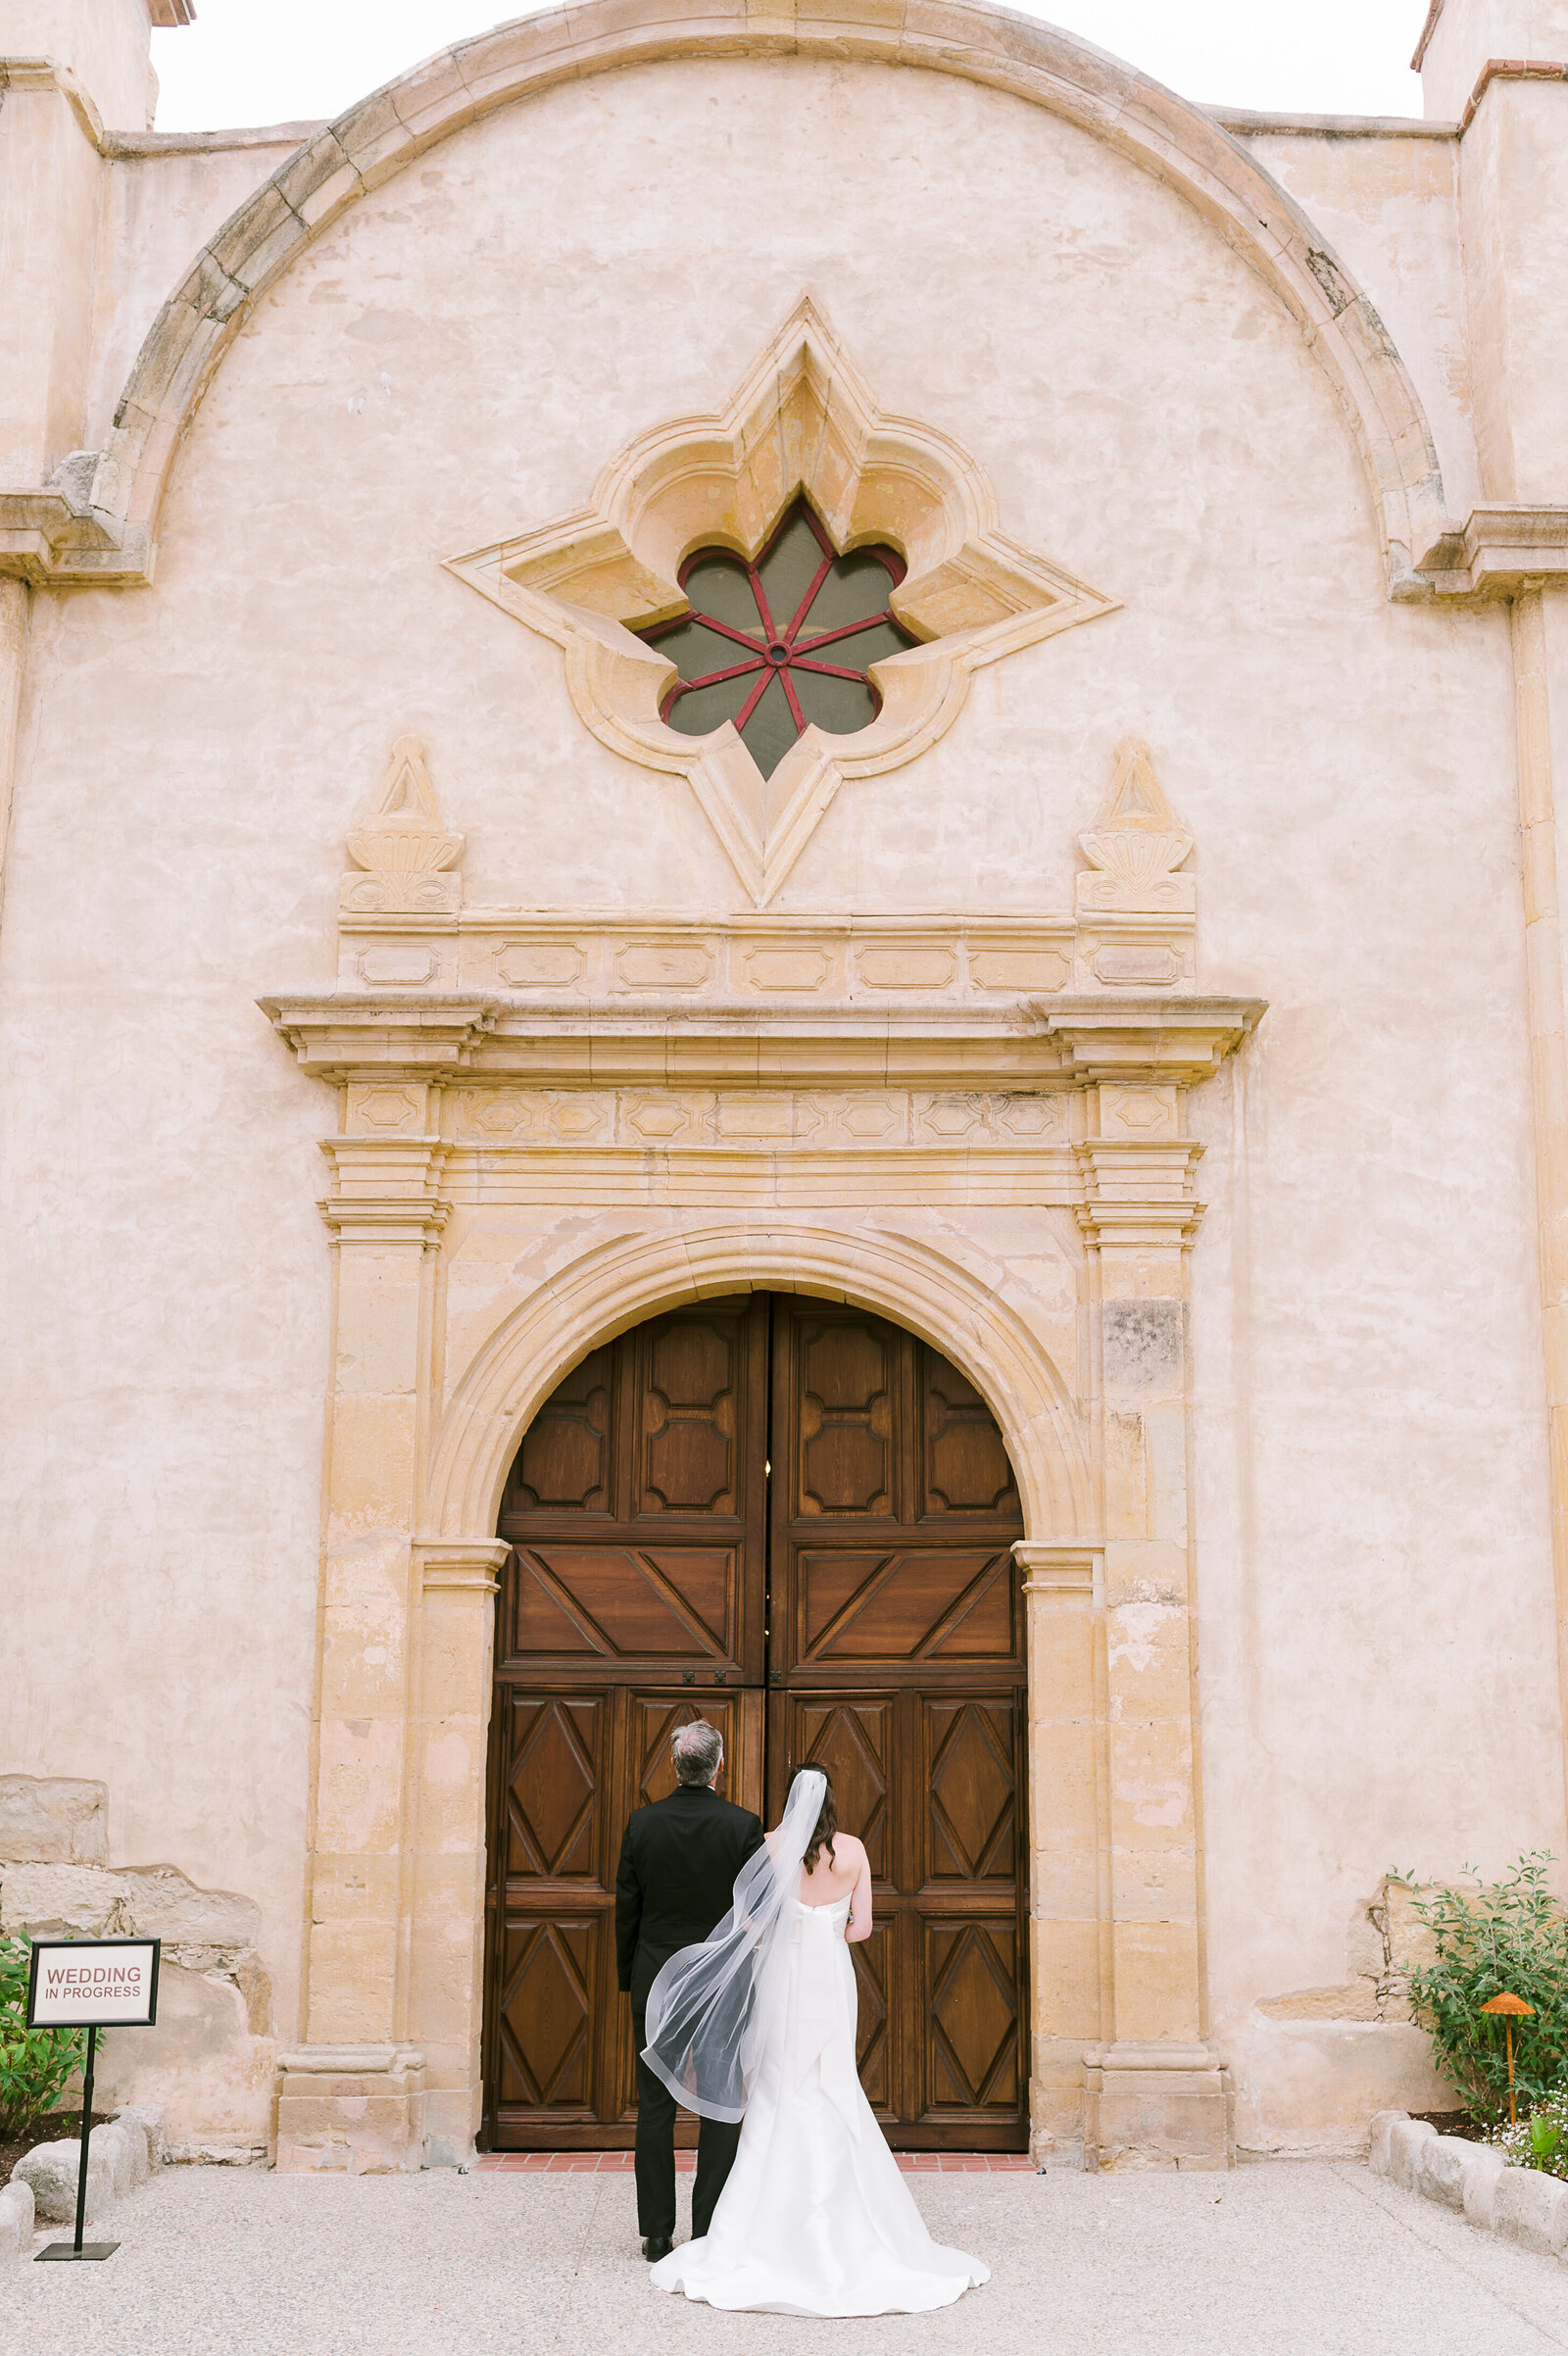 Bride and her father waiting to walk down aisle at Carmel Mission